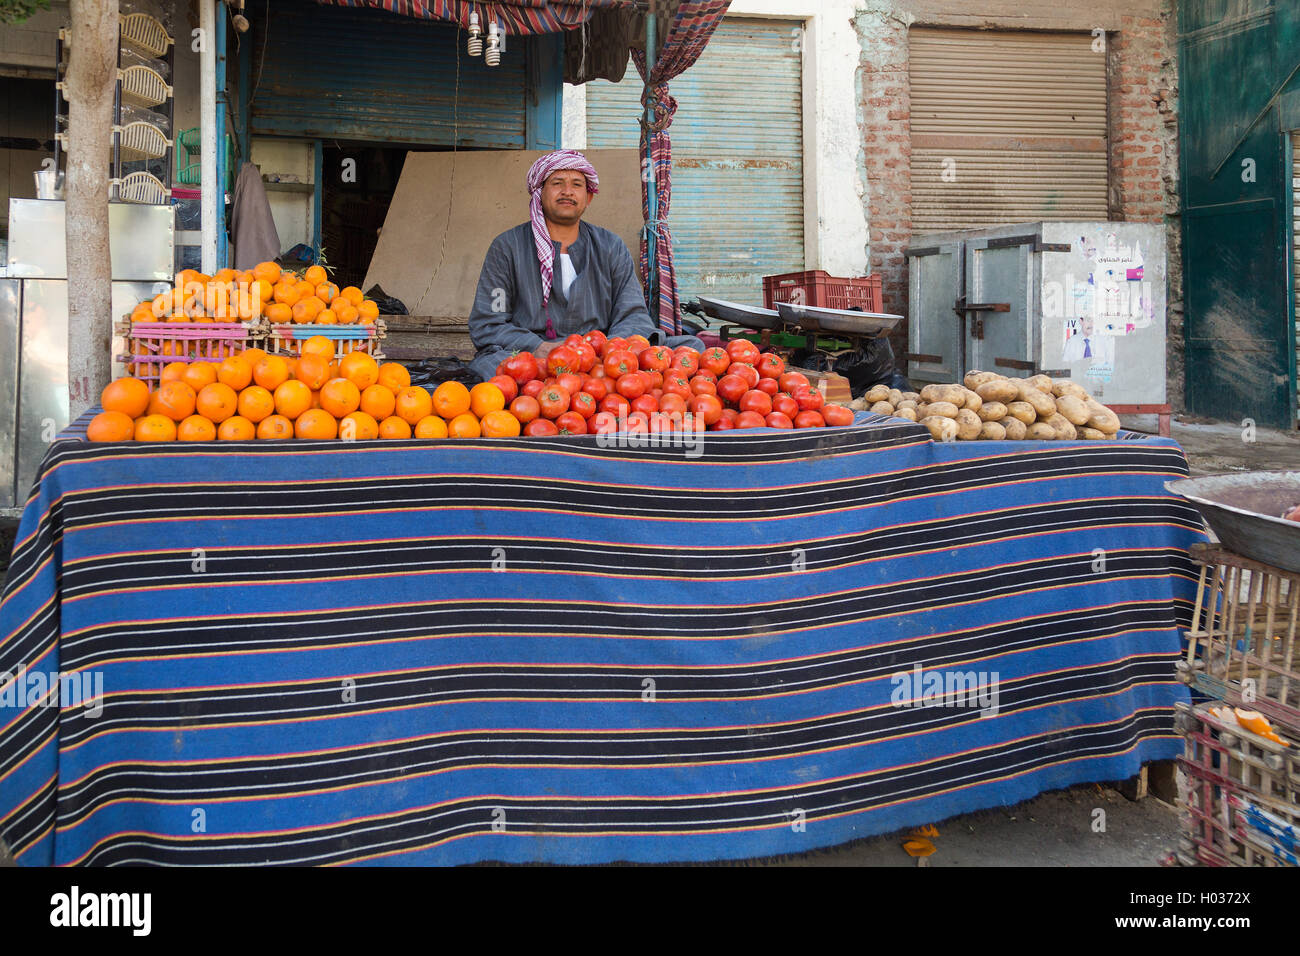 DARAW, EGYPT - FEBRUARY 6, 2016: Local food vendor at Daraw market selling oranges and tomatoes. Stock Photo